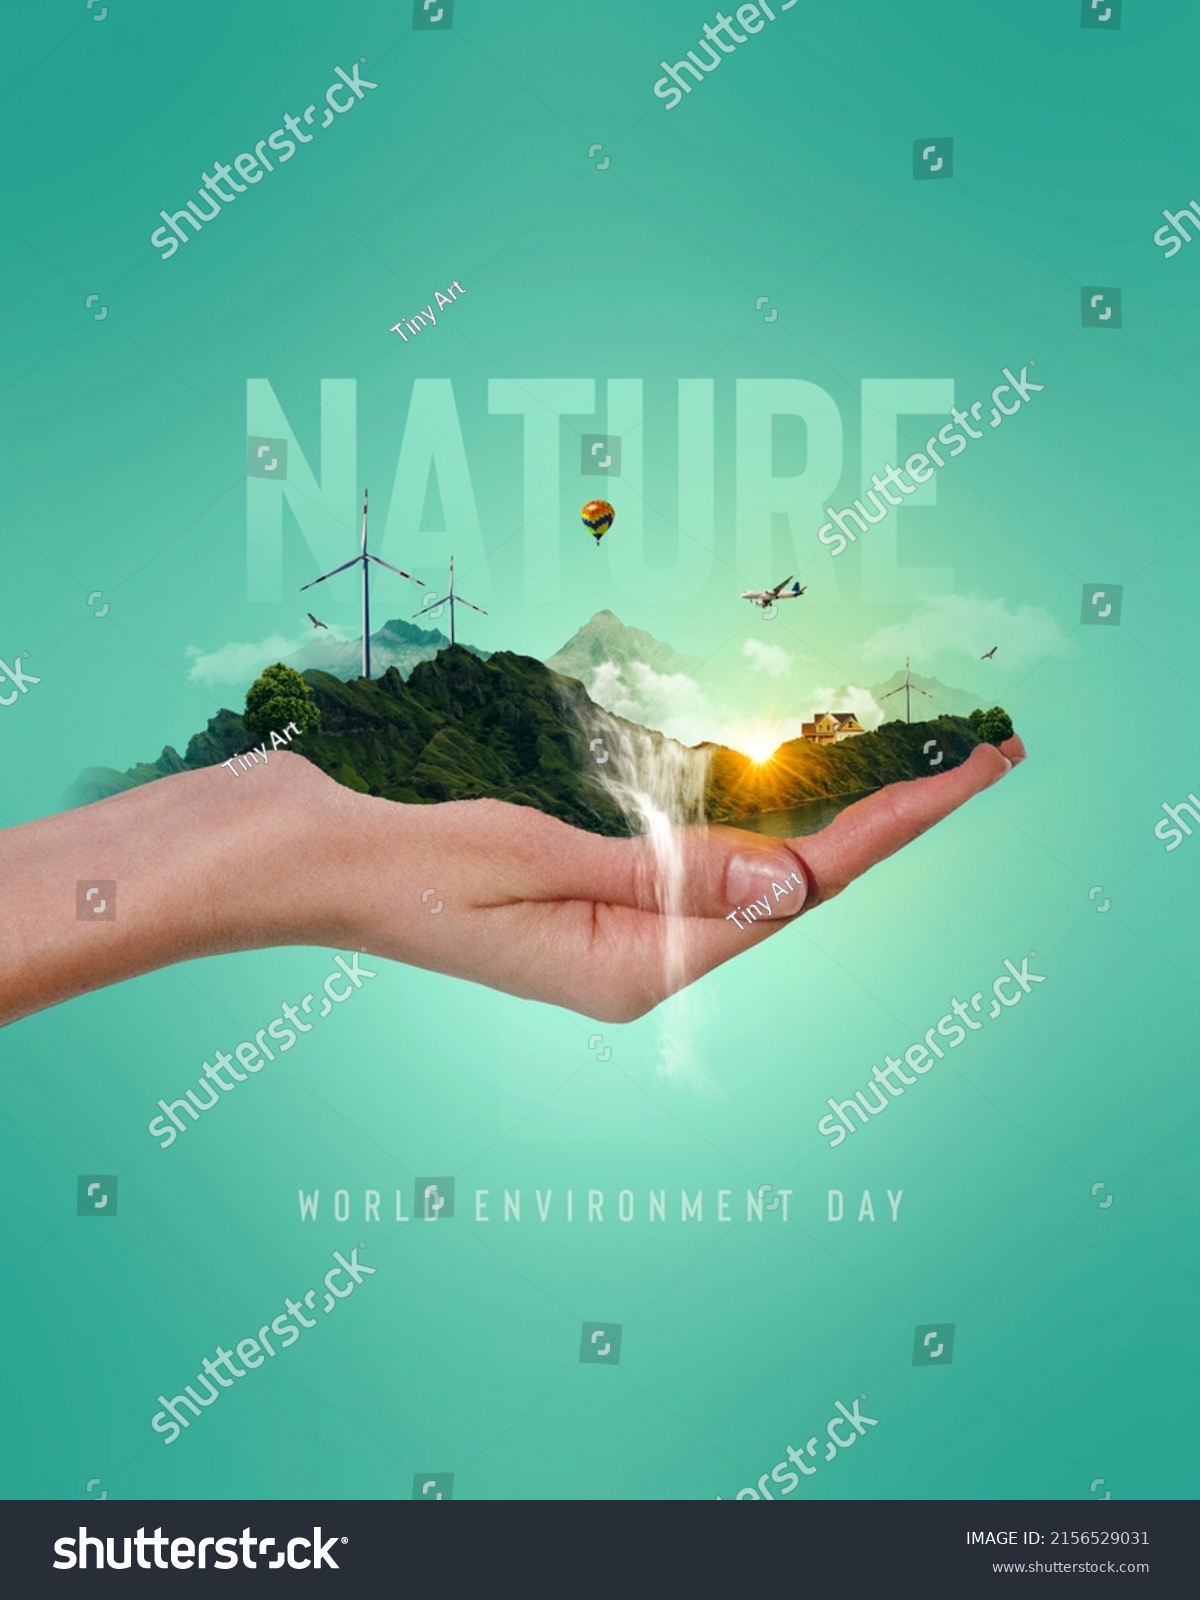 World environment day text with a hand and nature landscape creative concept image manipulation.  #2156529031